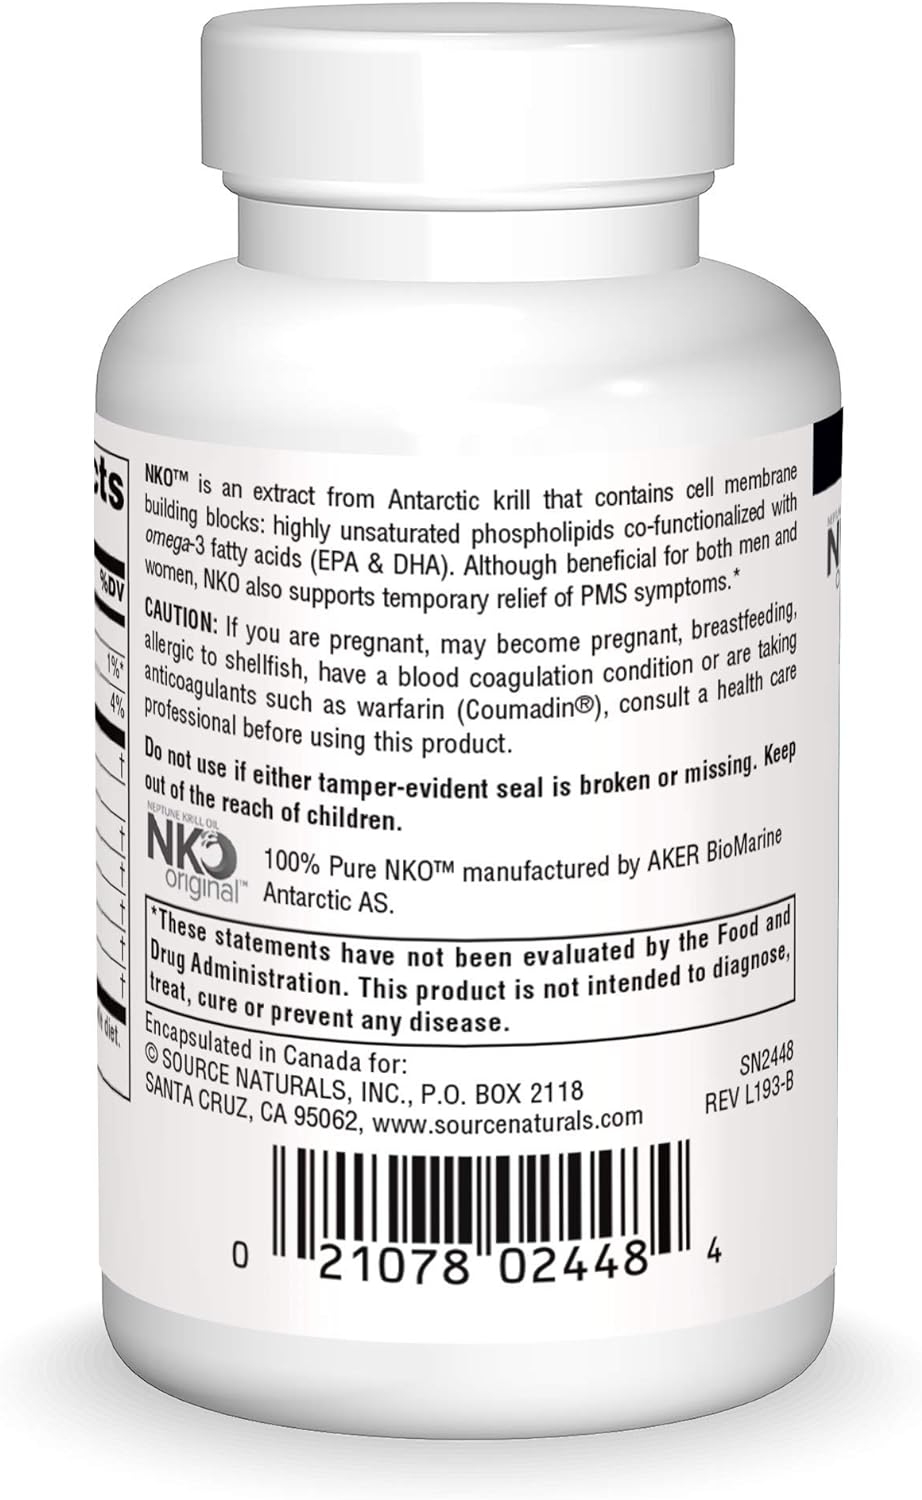 Source Naturals NKO Neptune Krill Oil, Supports Heart Health & Cell Membrane Integrity - 30 Softgels